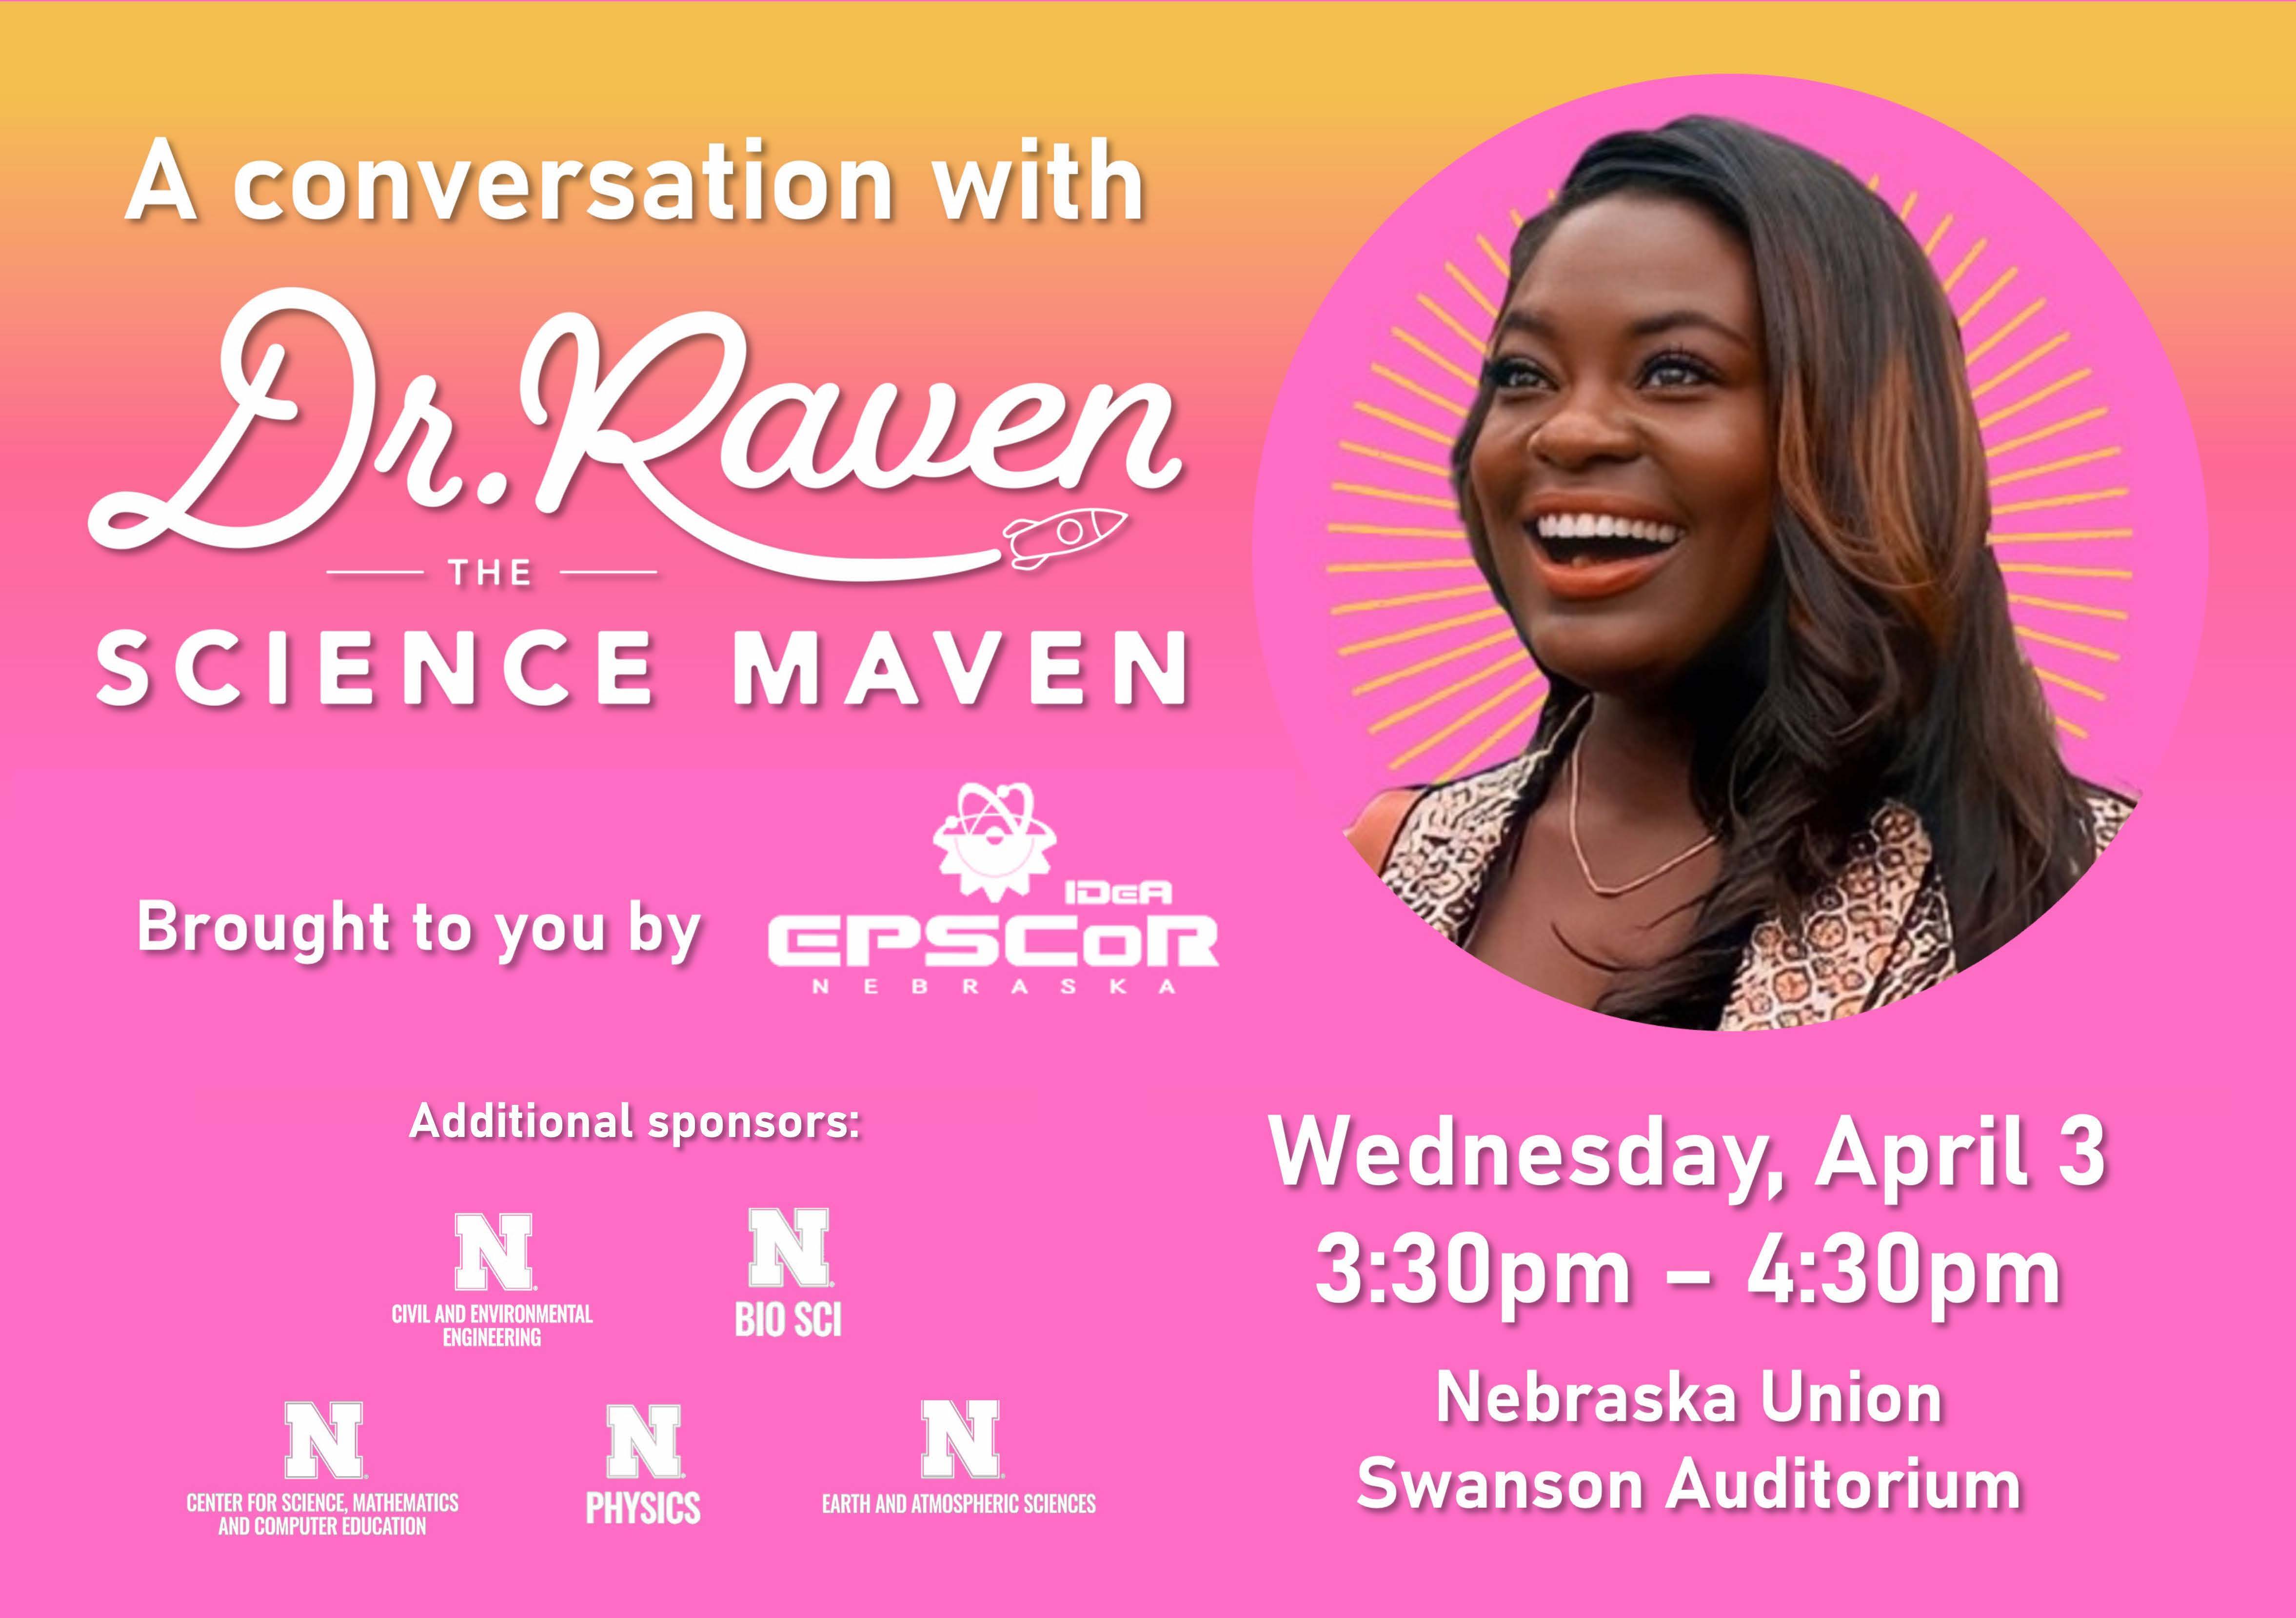 Dr. Raven the Science Maven will visit UNL on Wed., April 3.